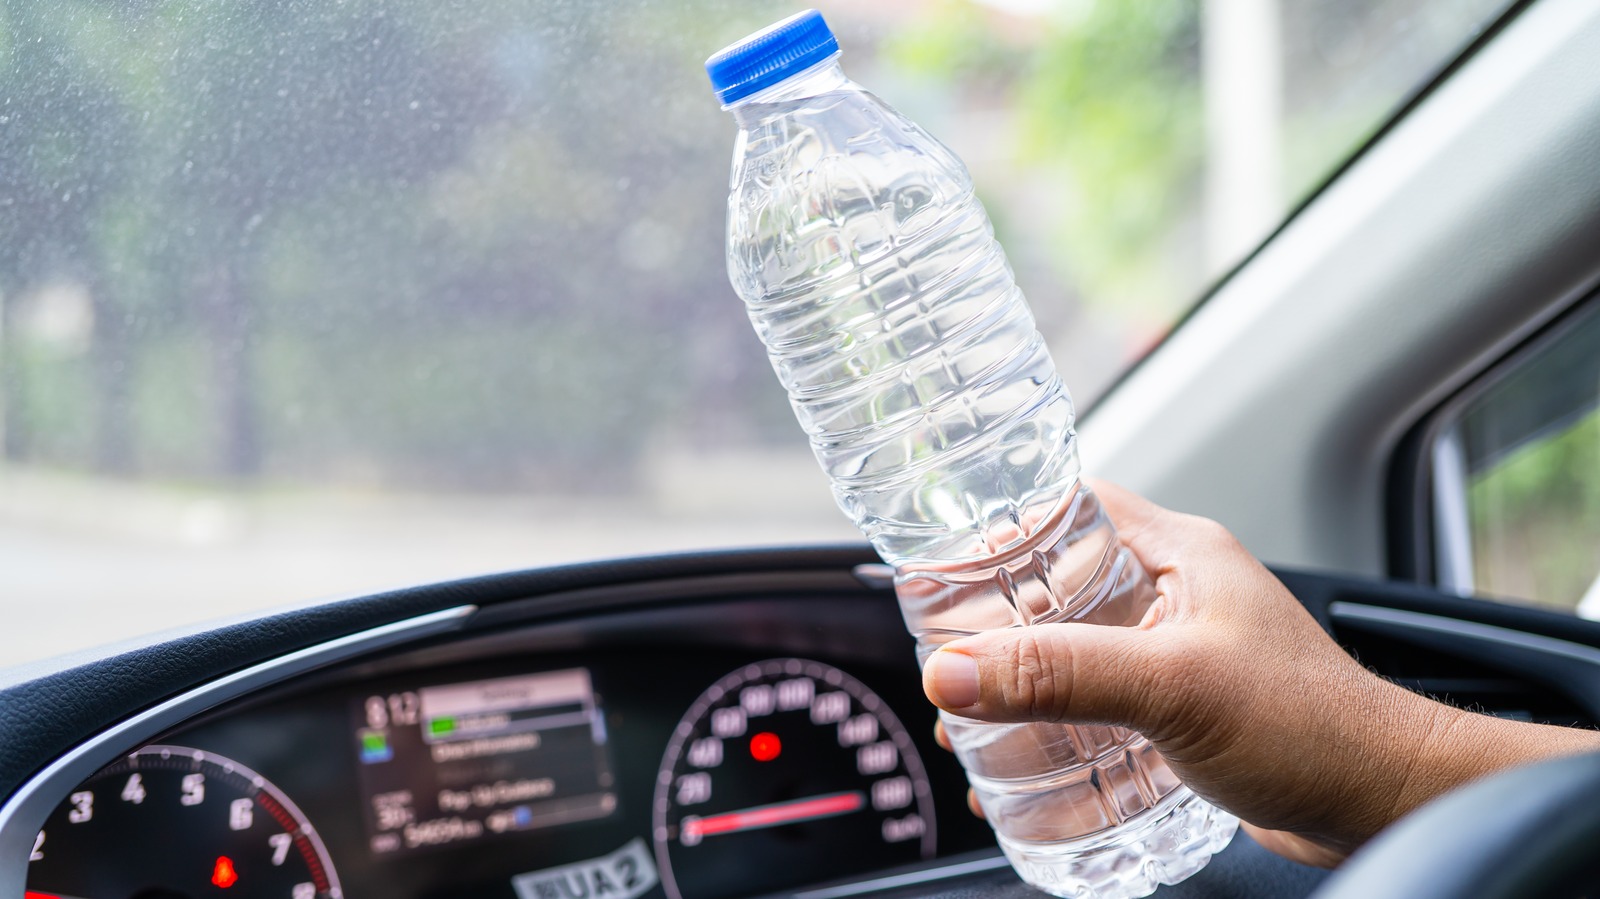 VERIFY: Is it safe to drink water from a plastic bottle left in a hot car?